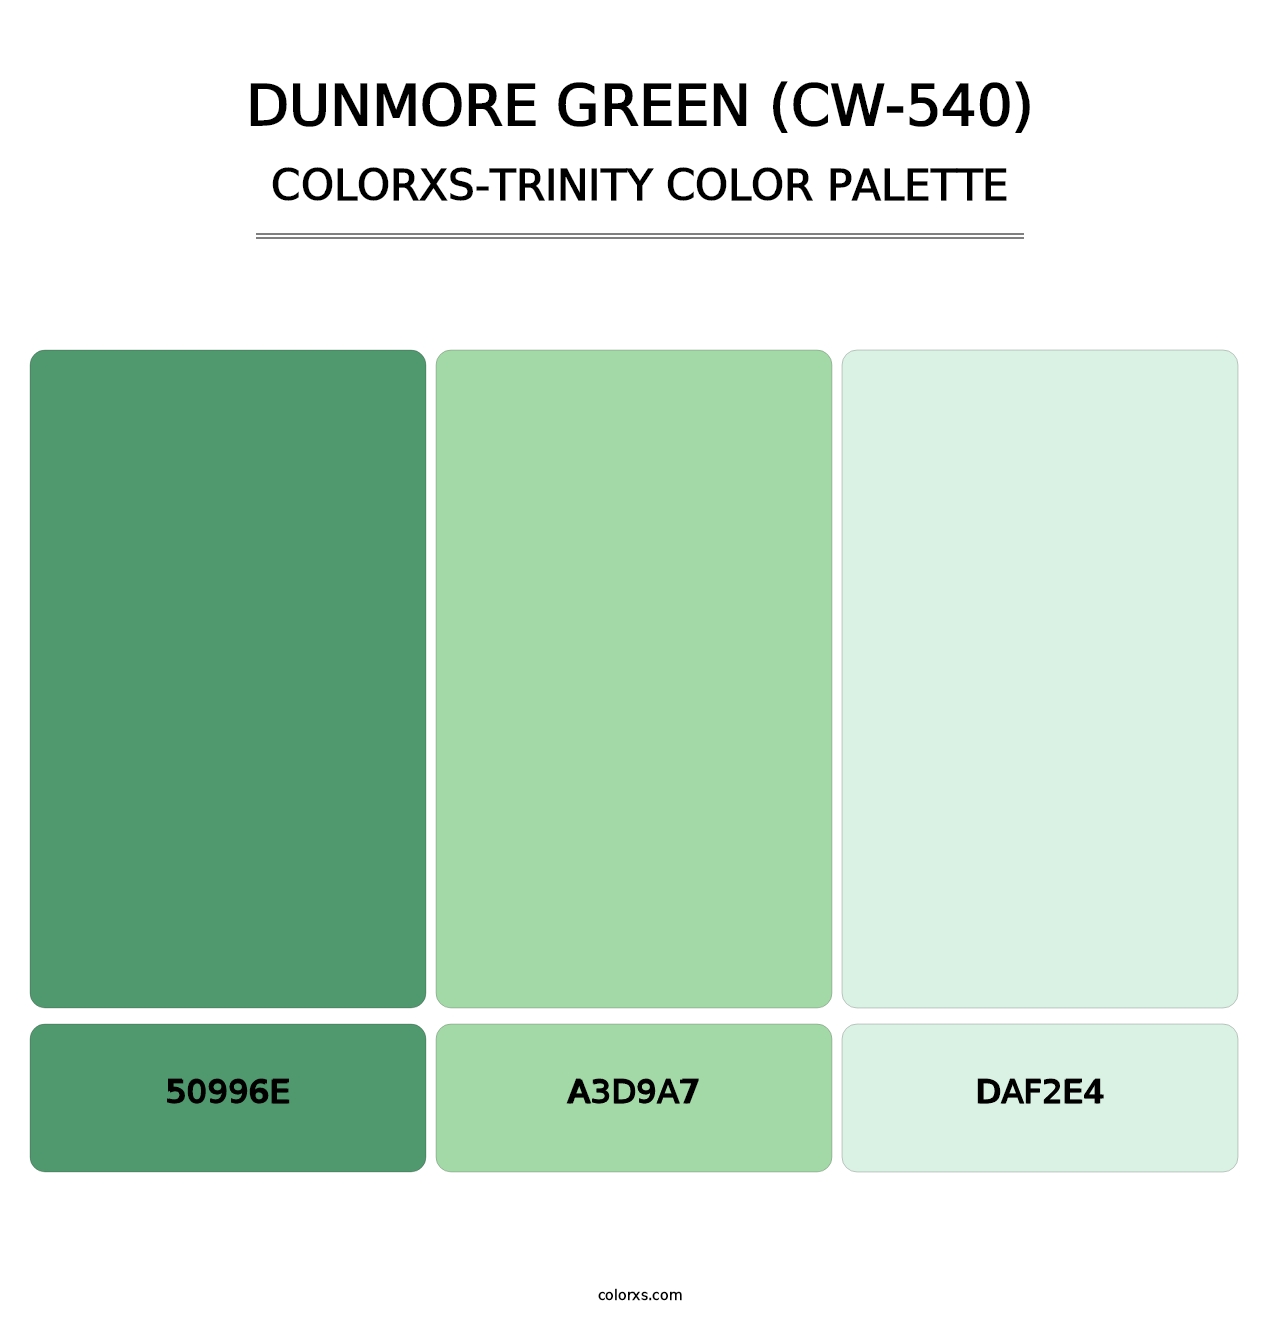 Dunmore Green (CW-540) - Colorxs Trinity Palette